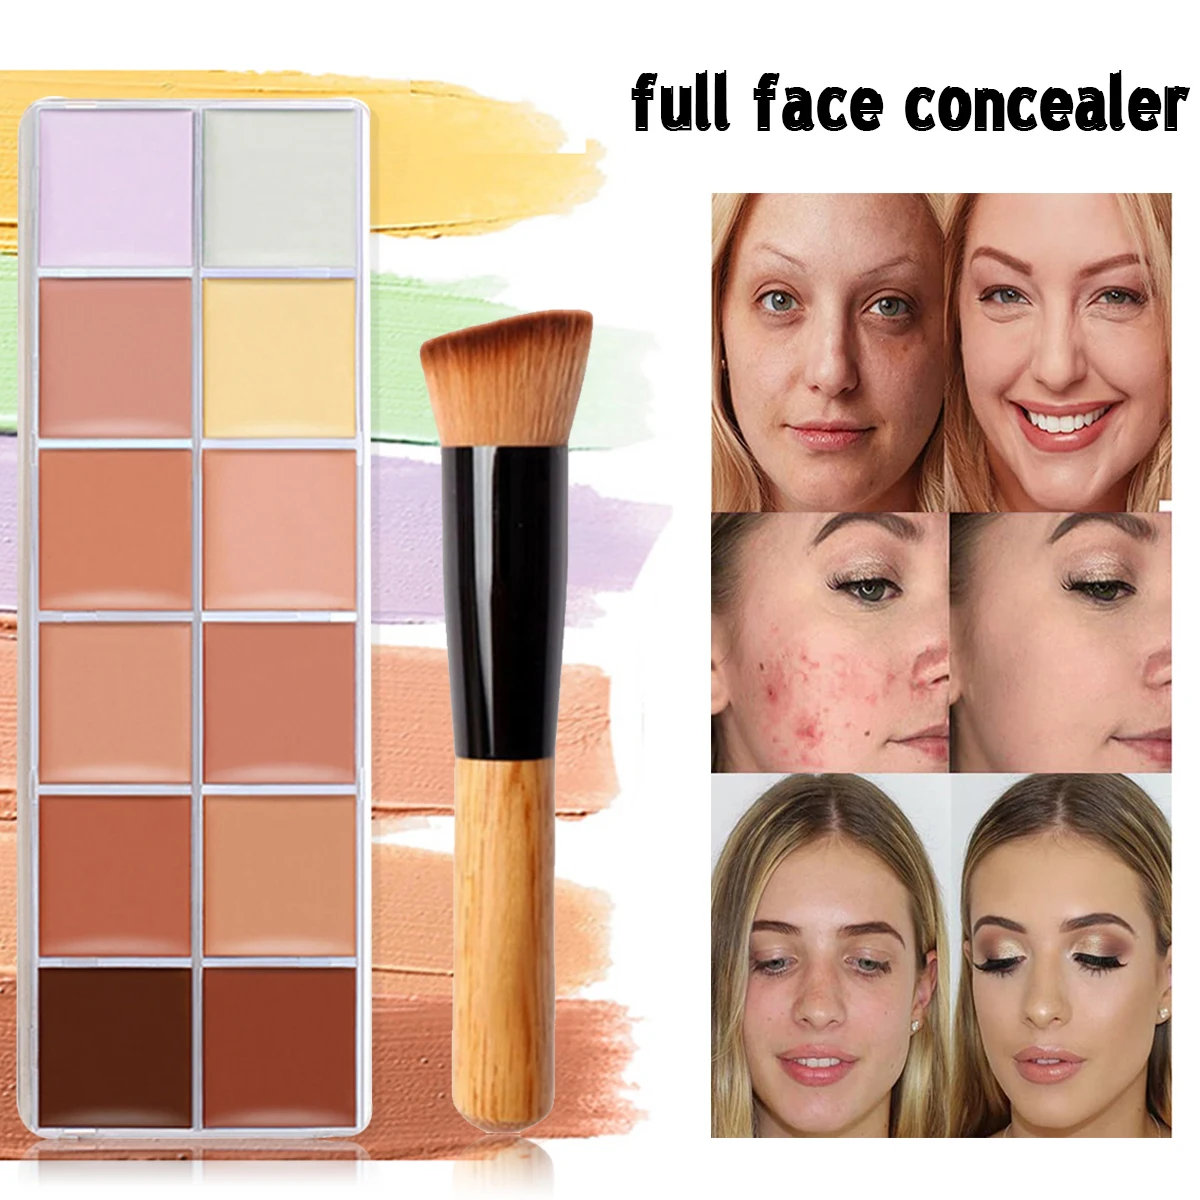 

12 Color Corrector Correcting Cream Concealer Contour Makeup Palette Set for Dark Circles and Puffiness Trouble Spots Redness